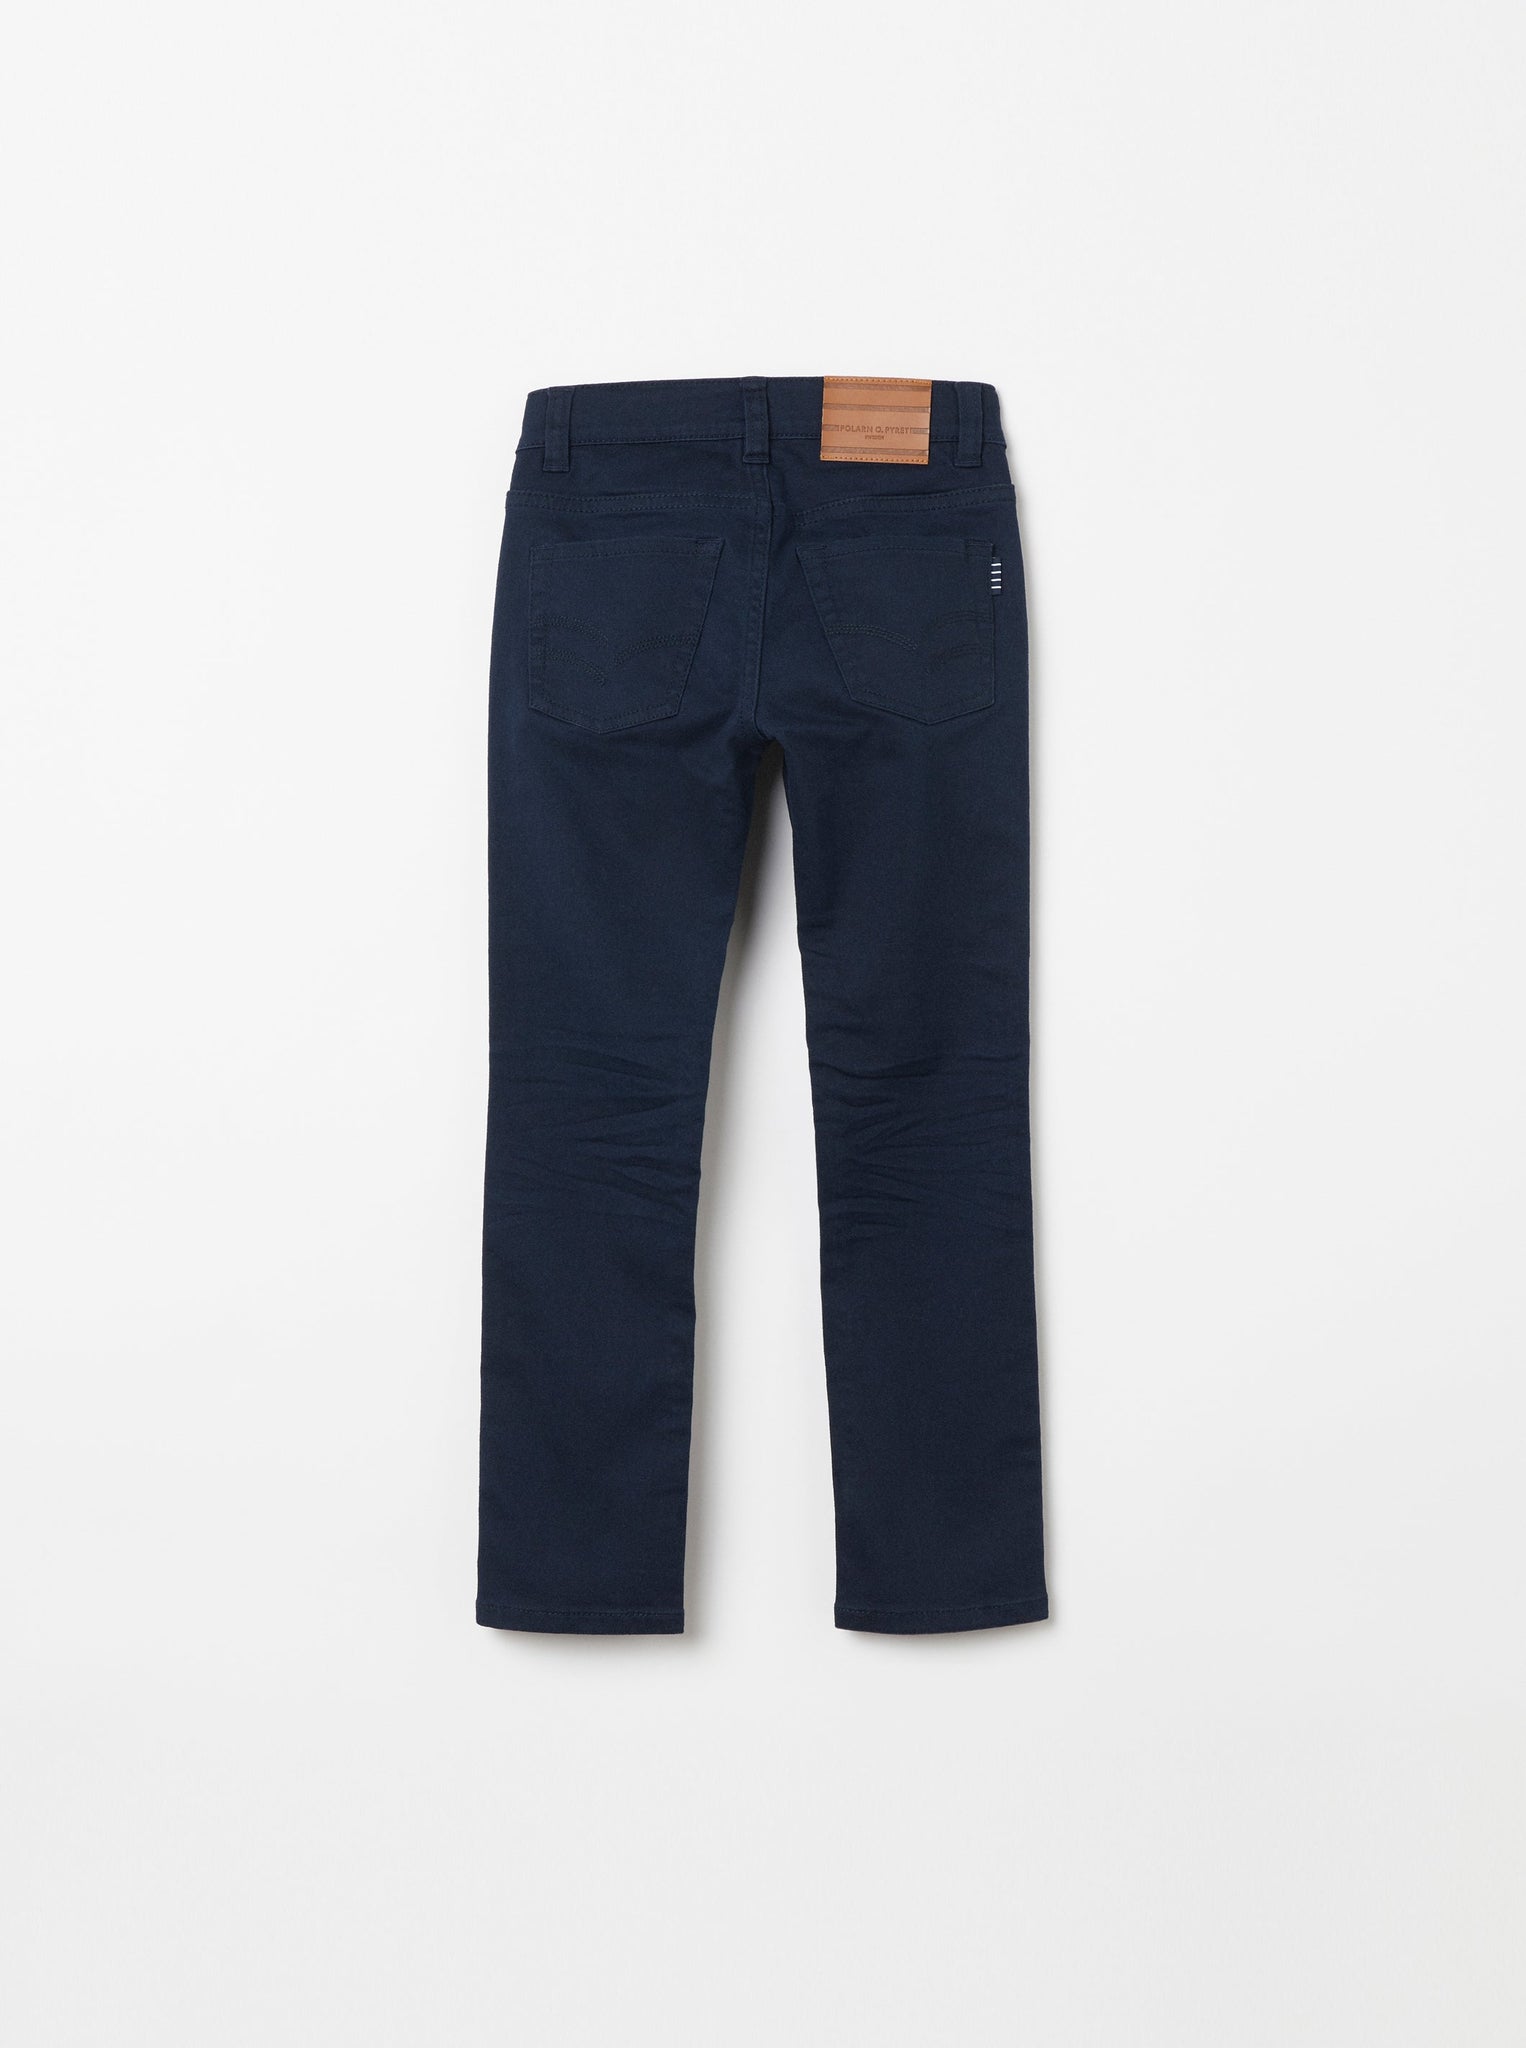 Organic Cotton Slim Fit Kids Jeans from the Polarn O. Pyret Kidswear collection. Ethically produced kids clothing.